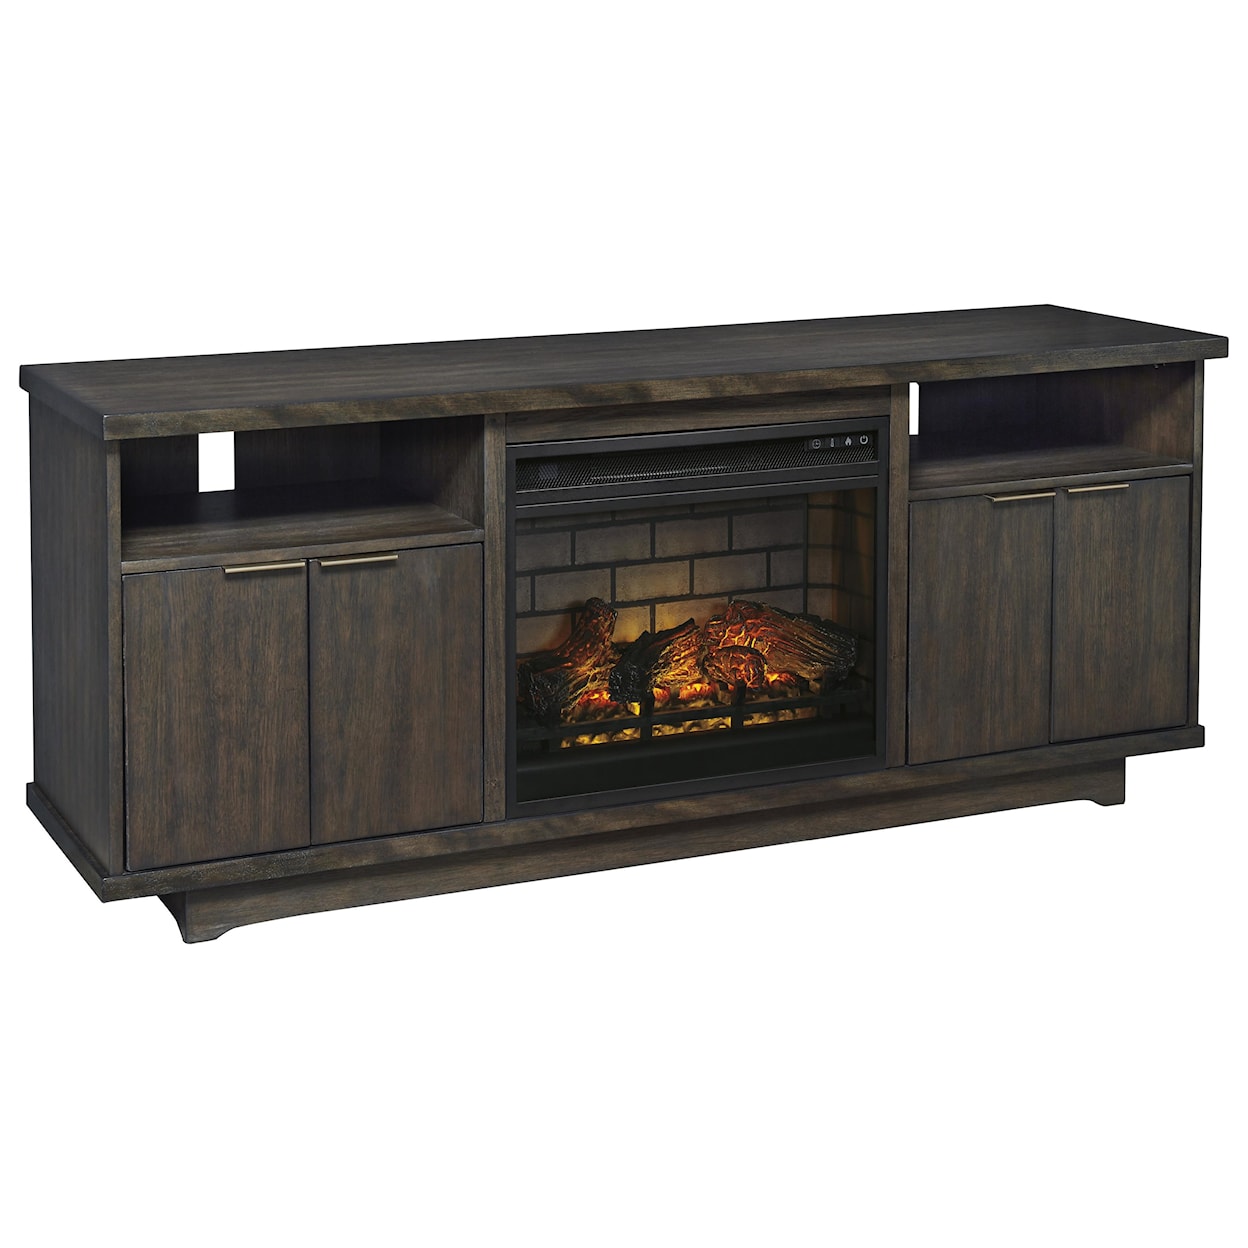 Signature Design by Ashley Brazburn 66" TV Stand with Fireplace Insert